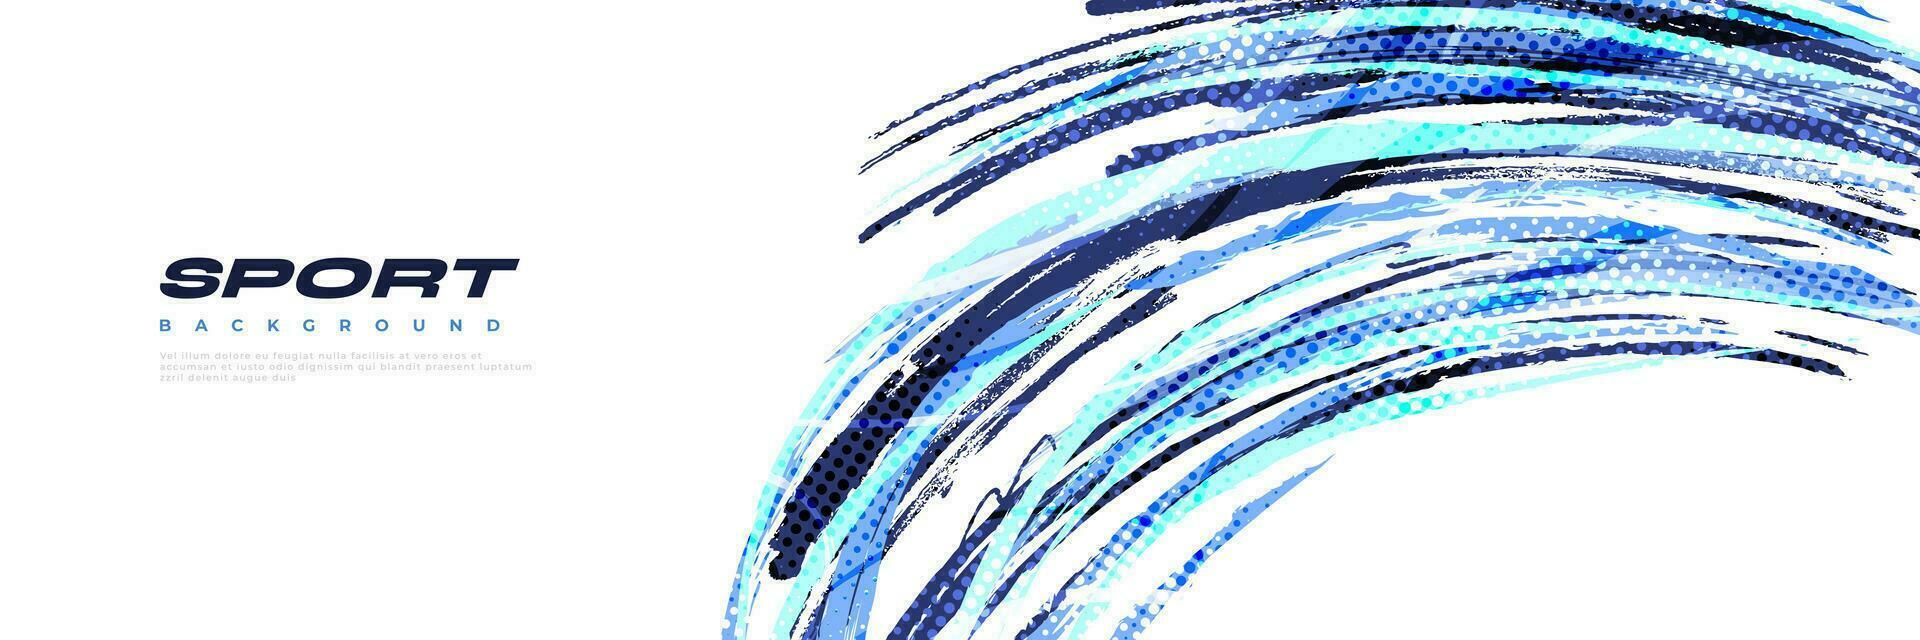 Abstract Brush Background with Halftone Effect. Sport Background with Blue Brush. Scratch and Texture Elements For Design vector